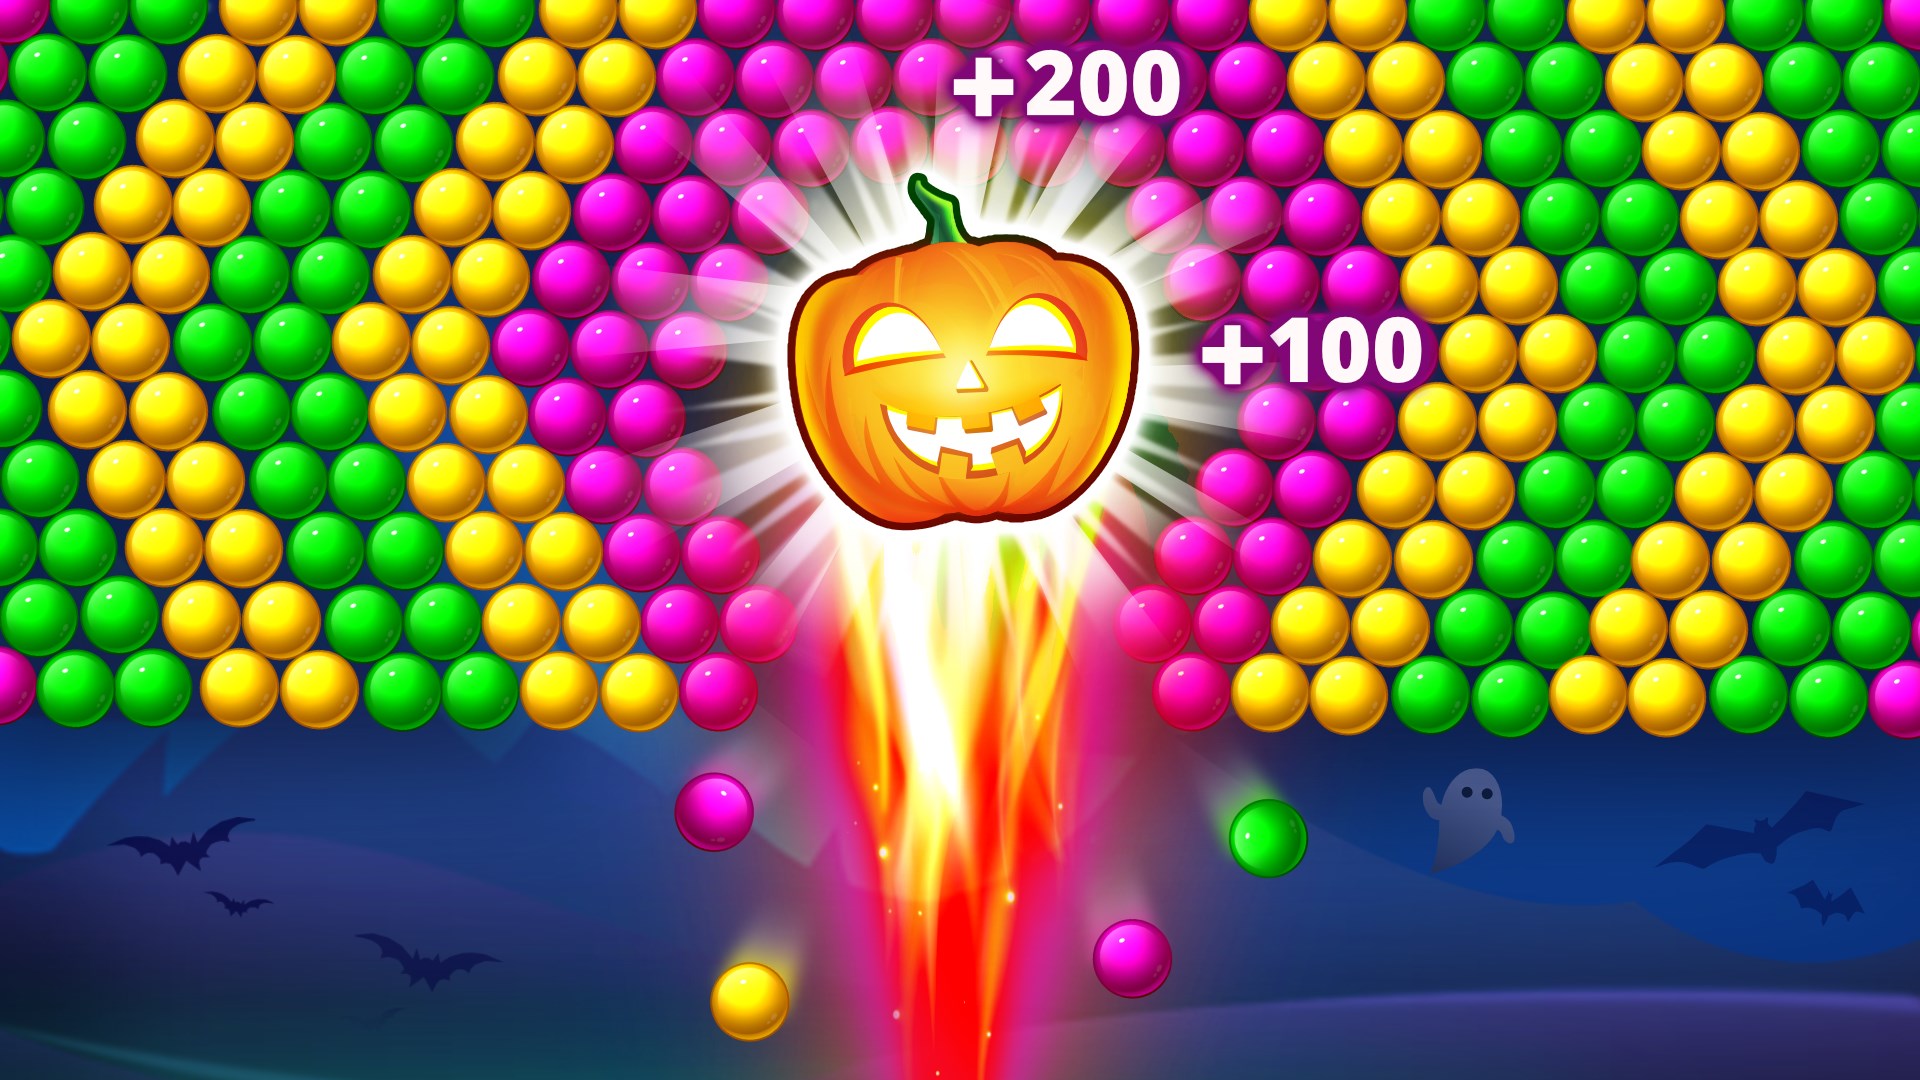 bubble popping games free